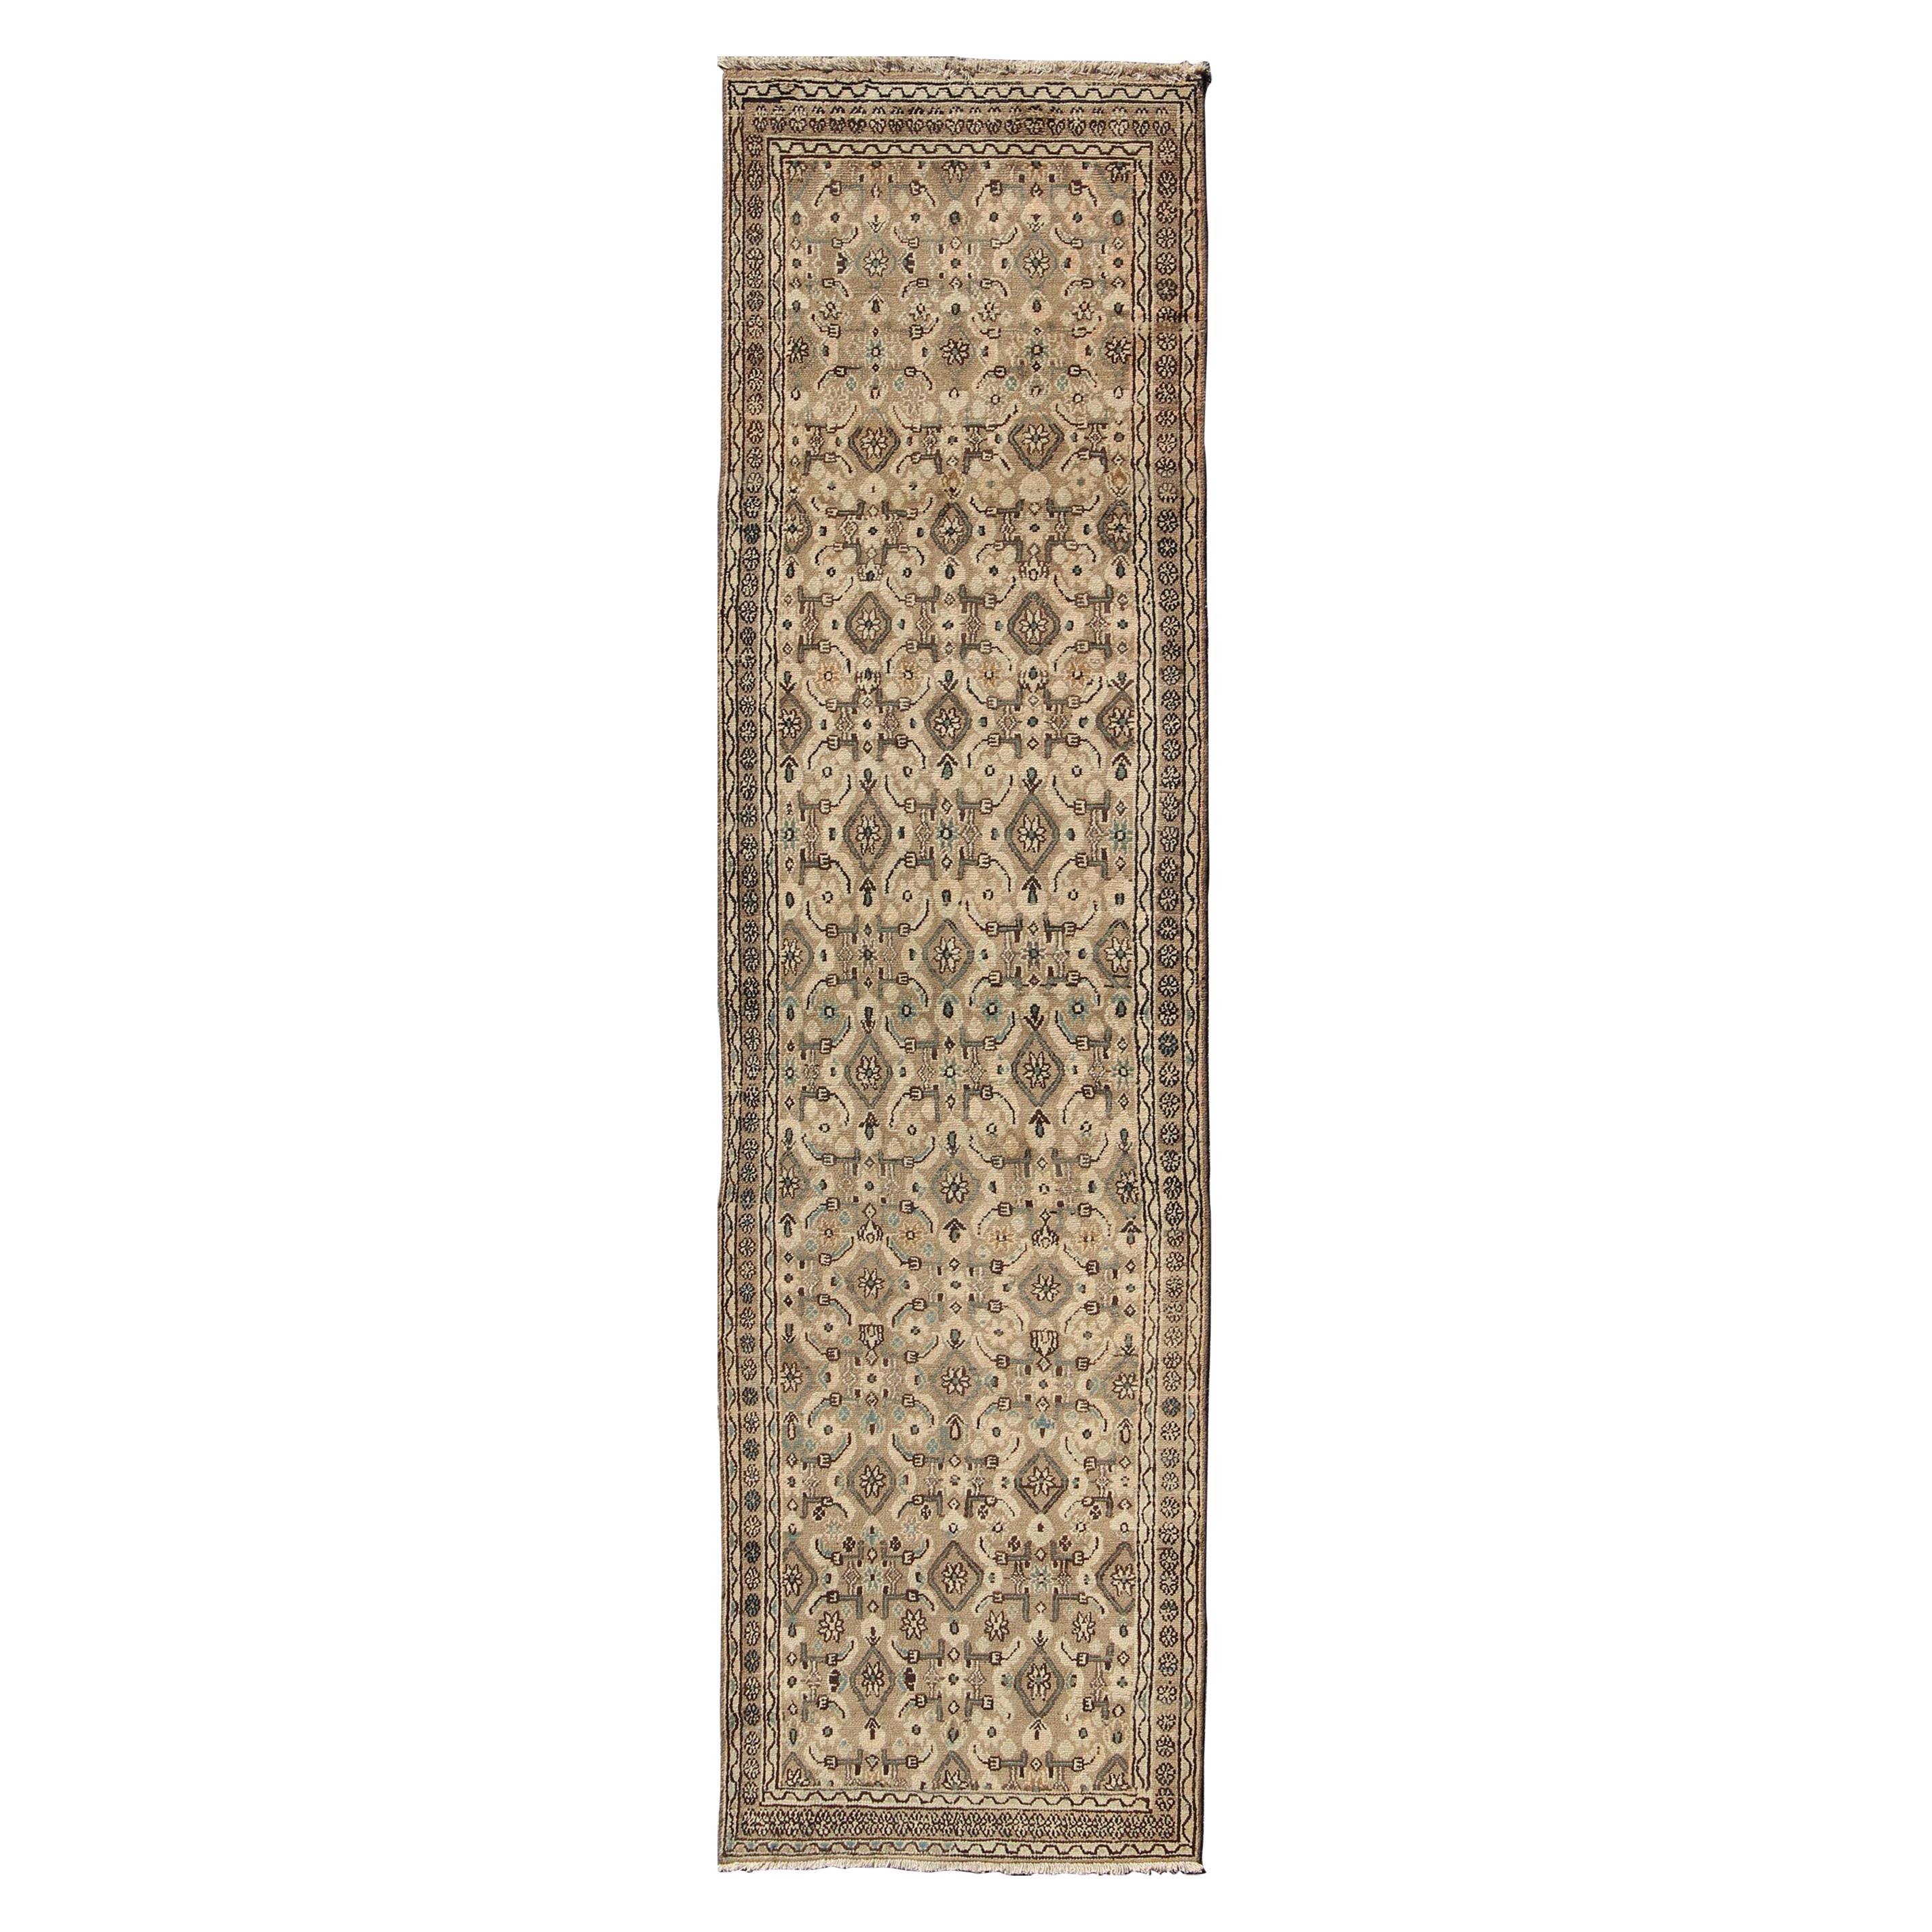 Antique Hamadan Runner in Neutral Warm Tones of Taupe, Brown, L. Brown For Sale